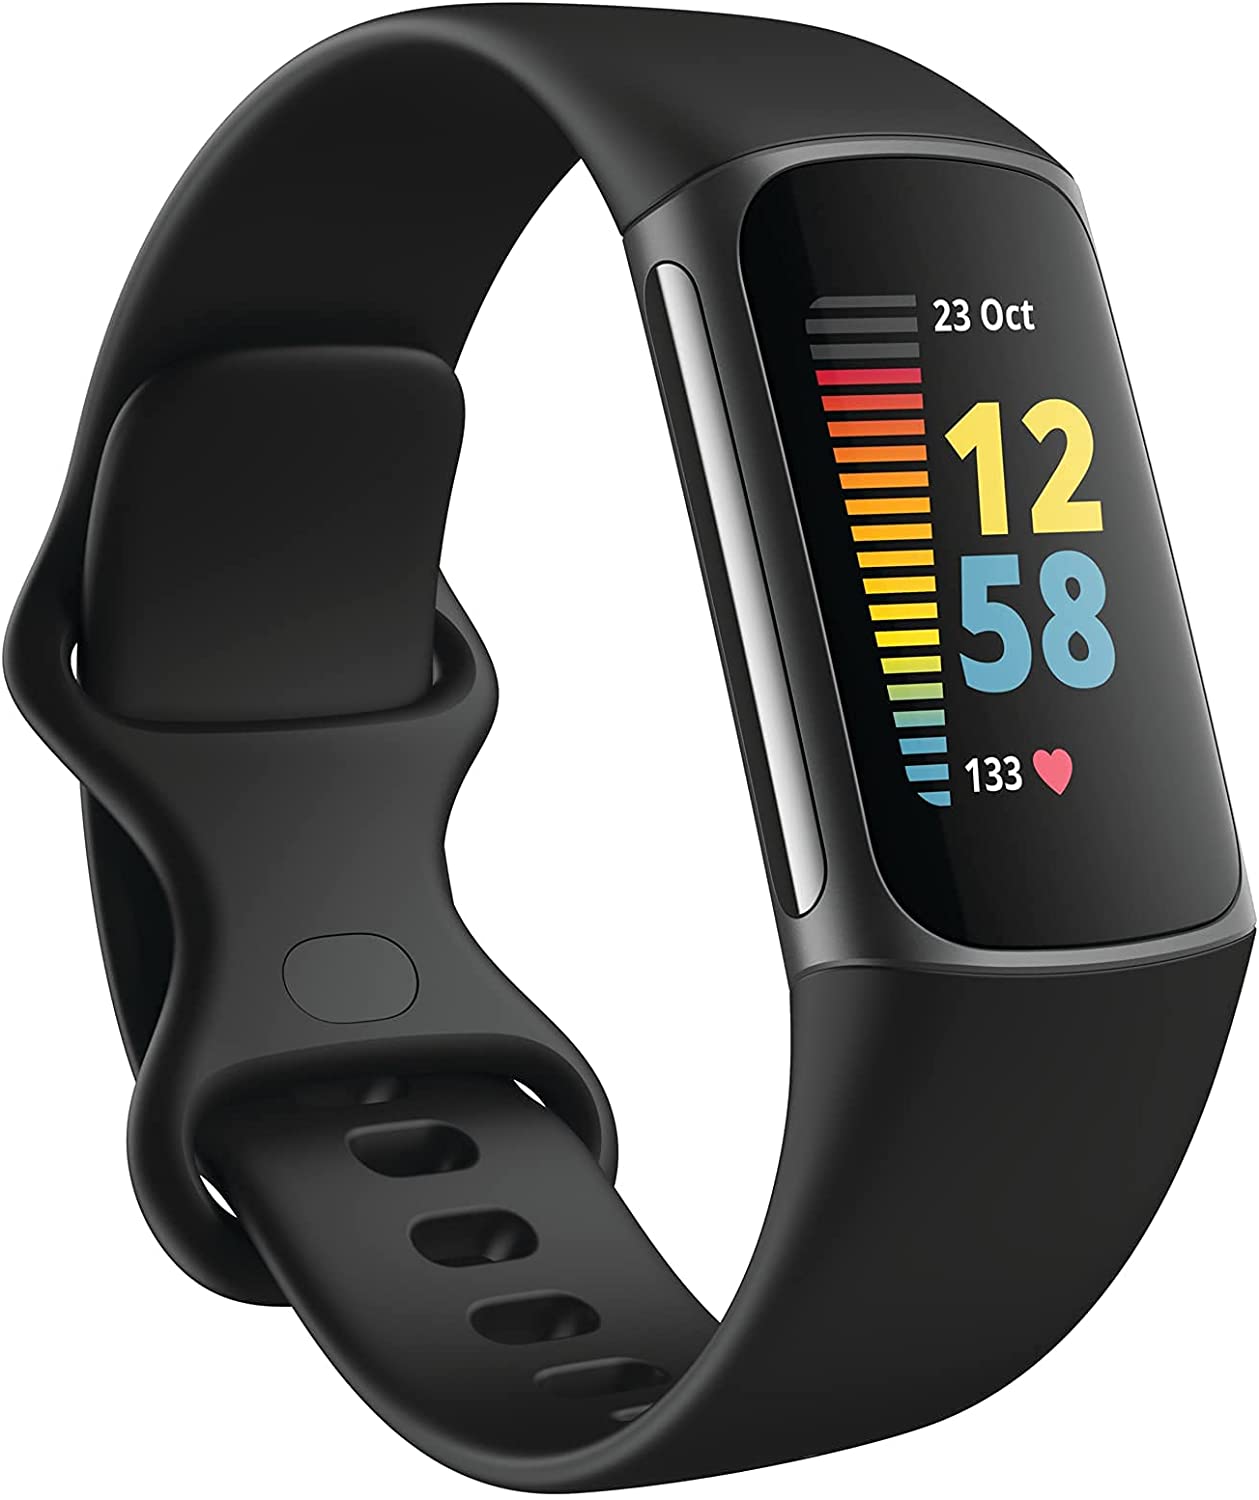 Fitbit Charge 5 vs Fitbit Charge 4